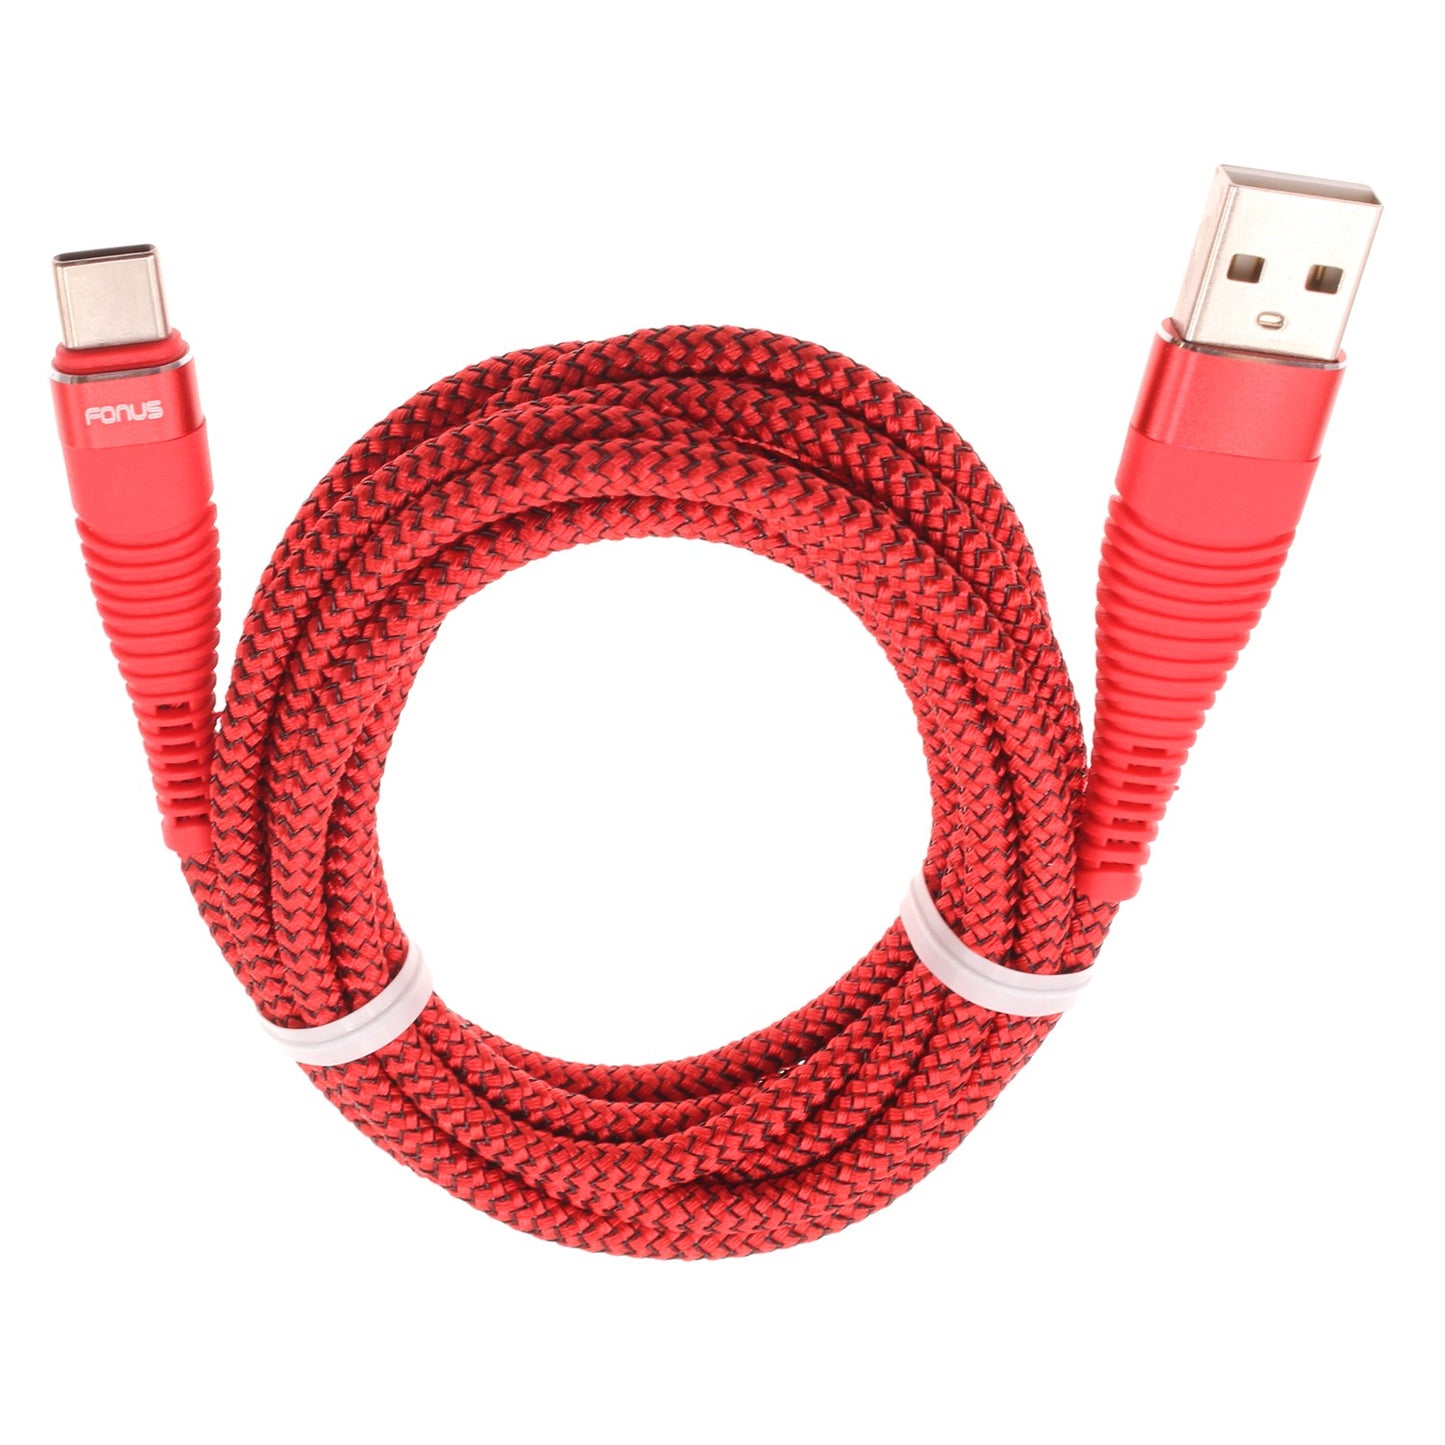  6ft and 10ft Long USB-C Cables ,   Red Braided   Data Sync   Power Wire   TYPE-C Cord   Fast Charge   - NWJ21+J53 1995-2